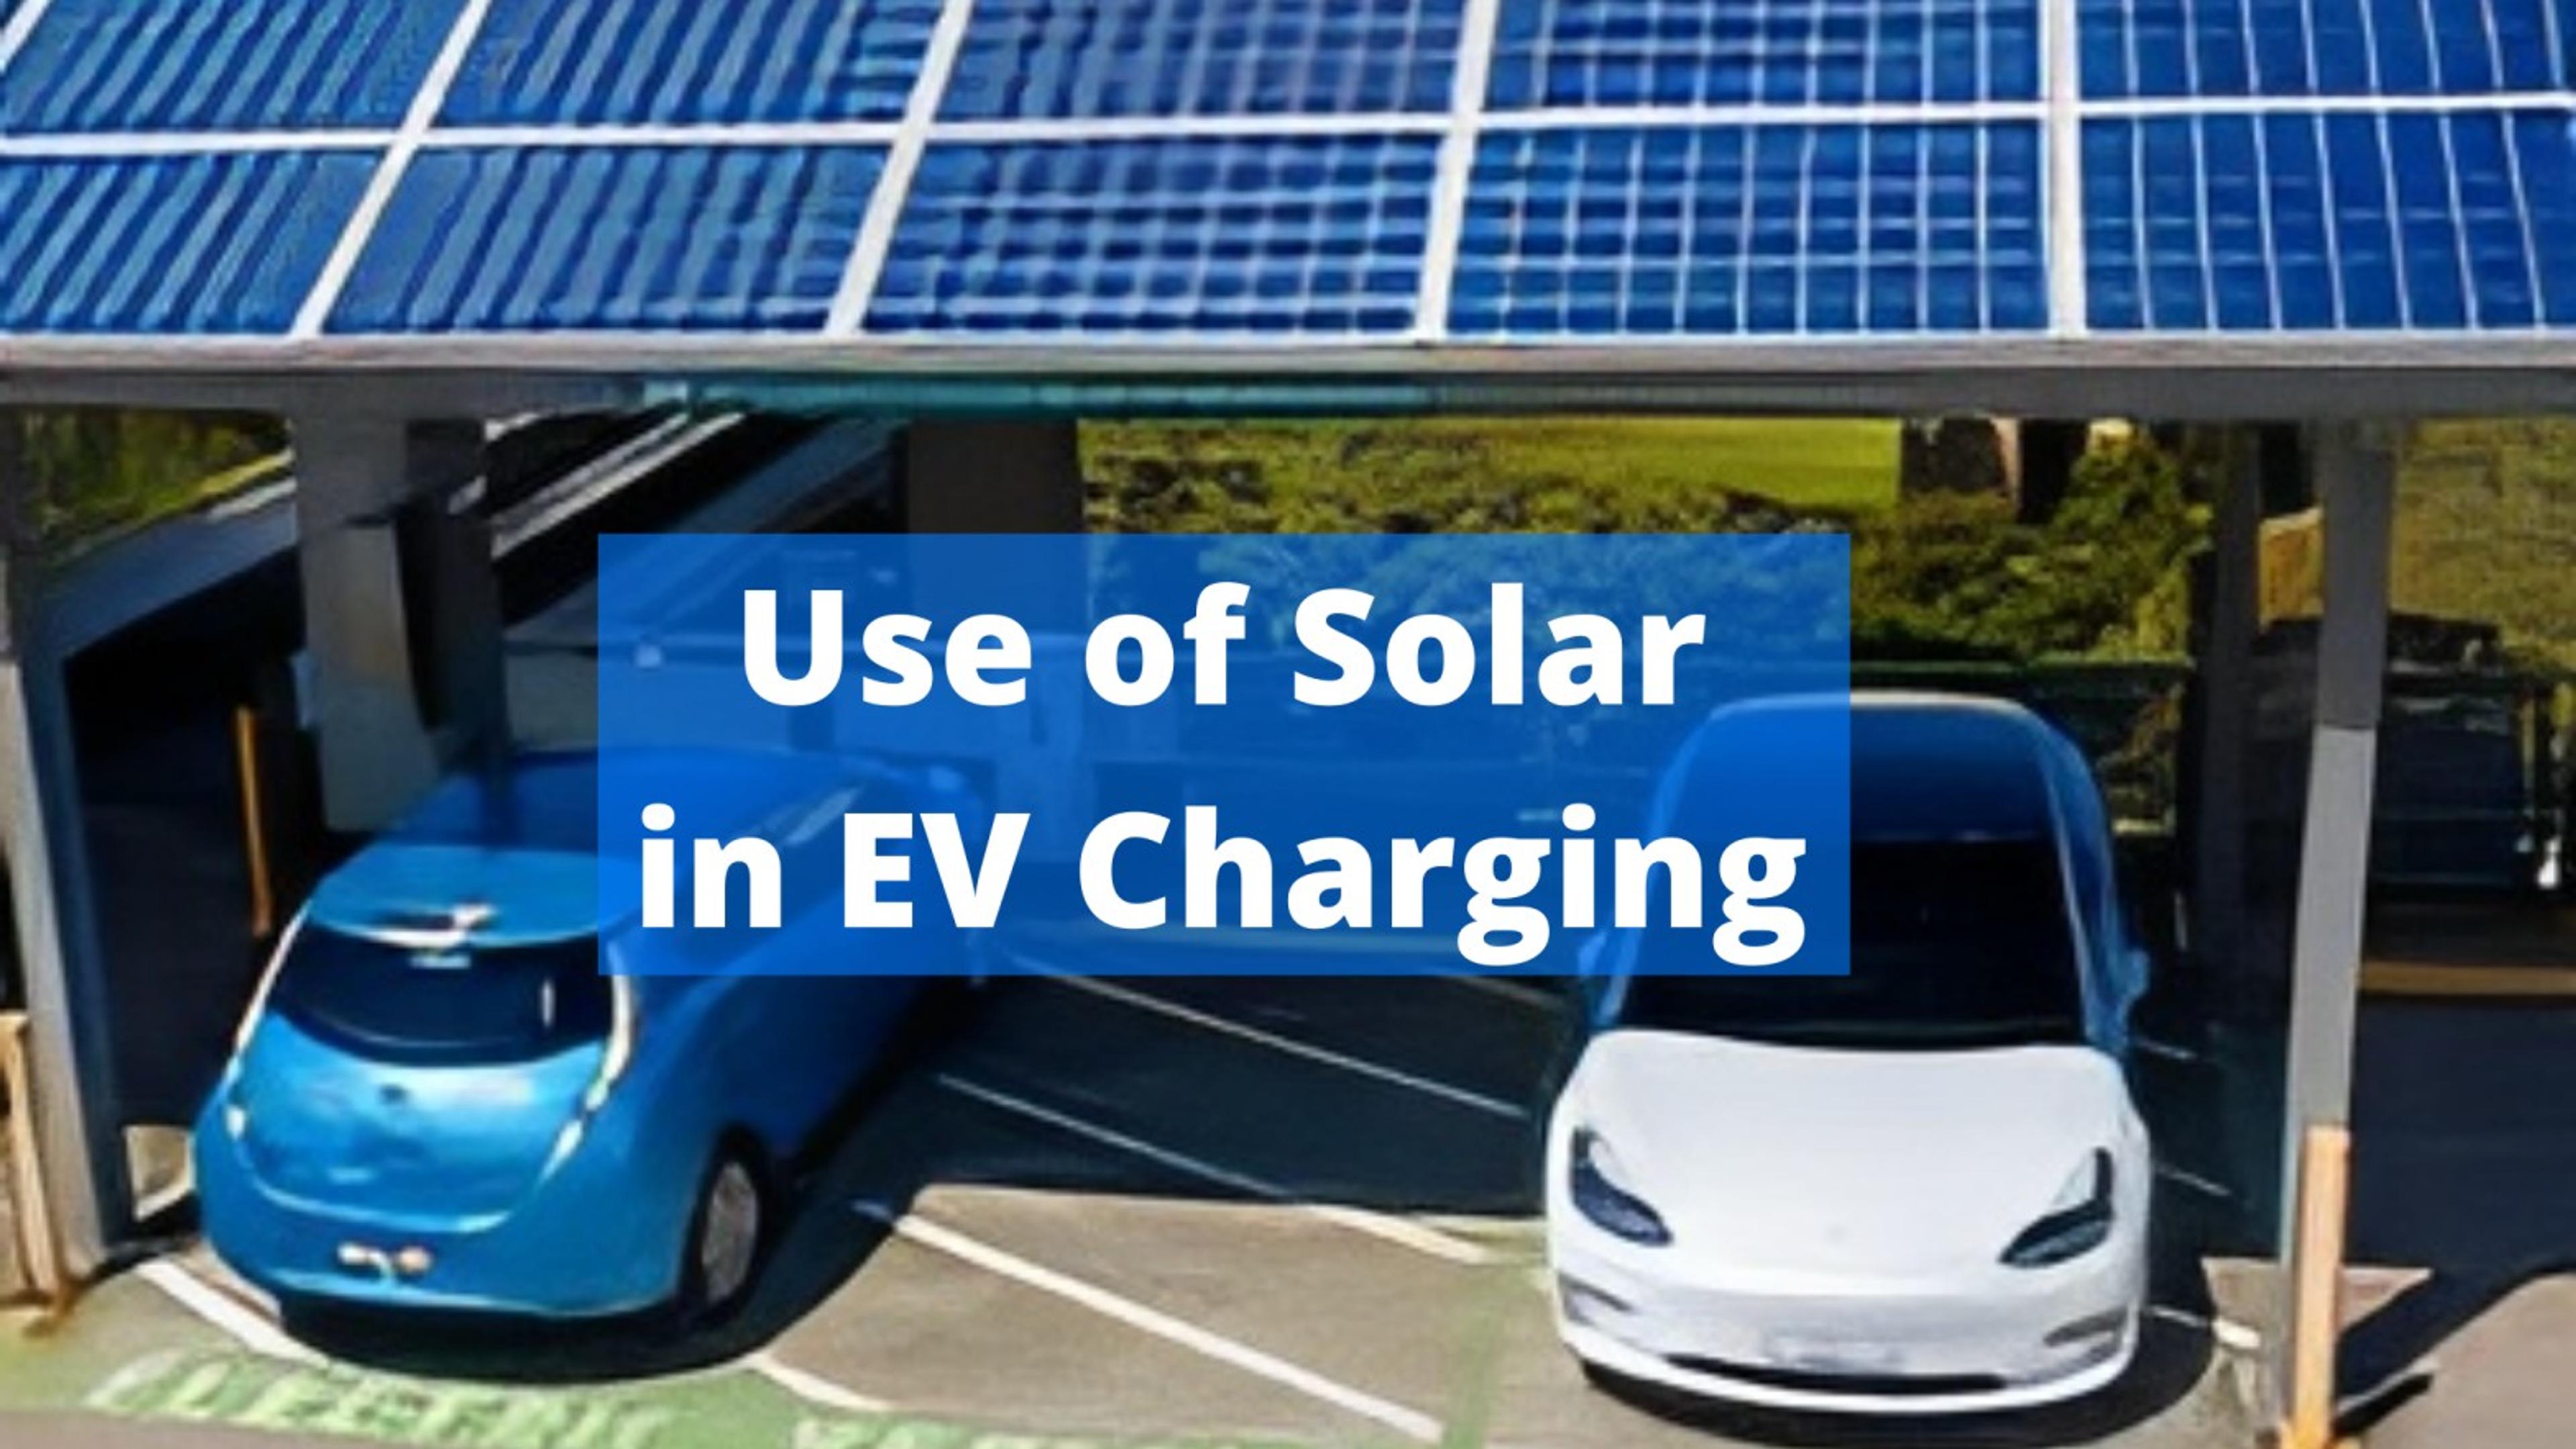 Use of solar panels to charge electric vehicles